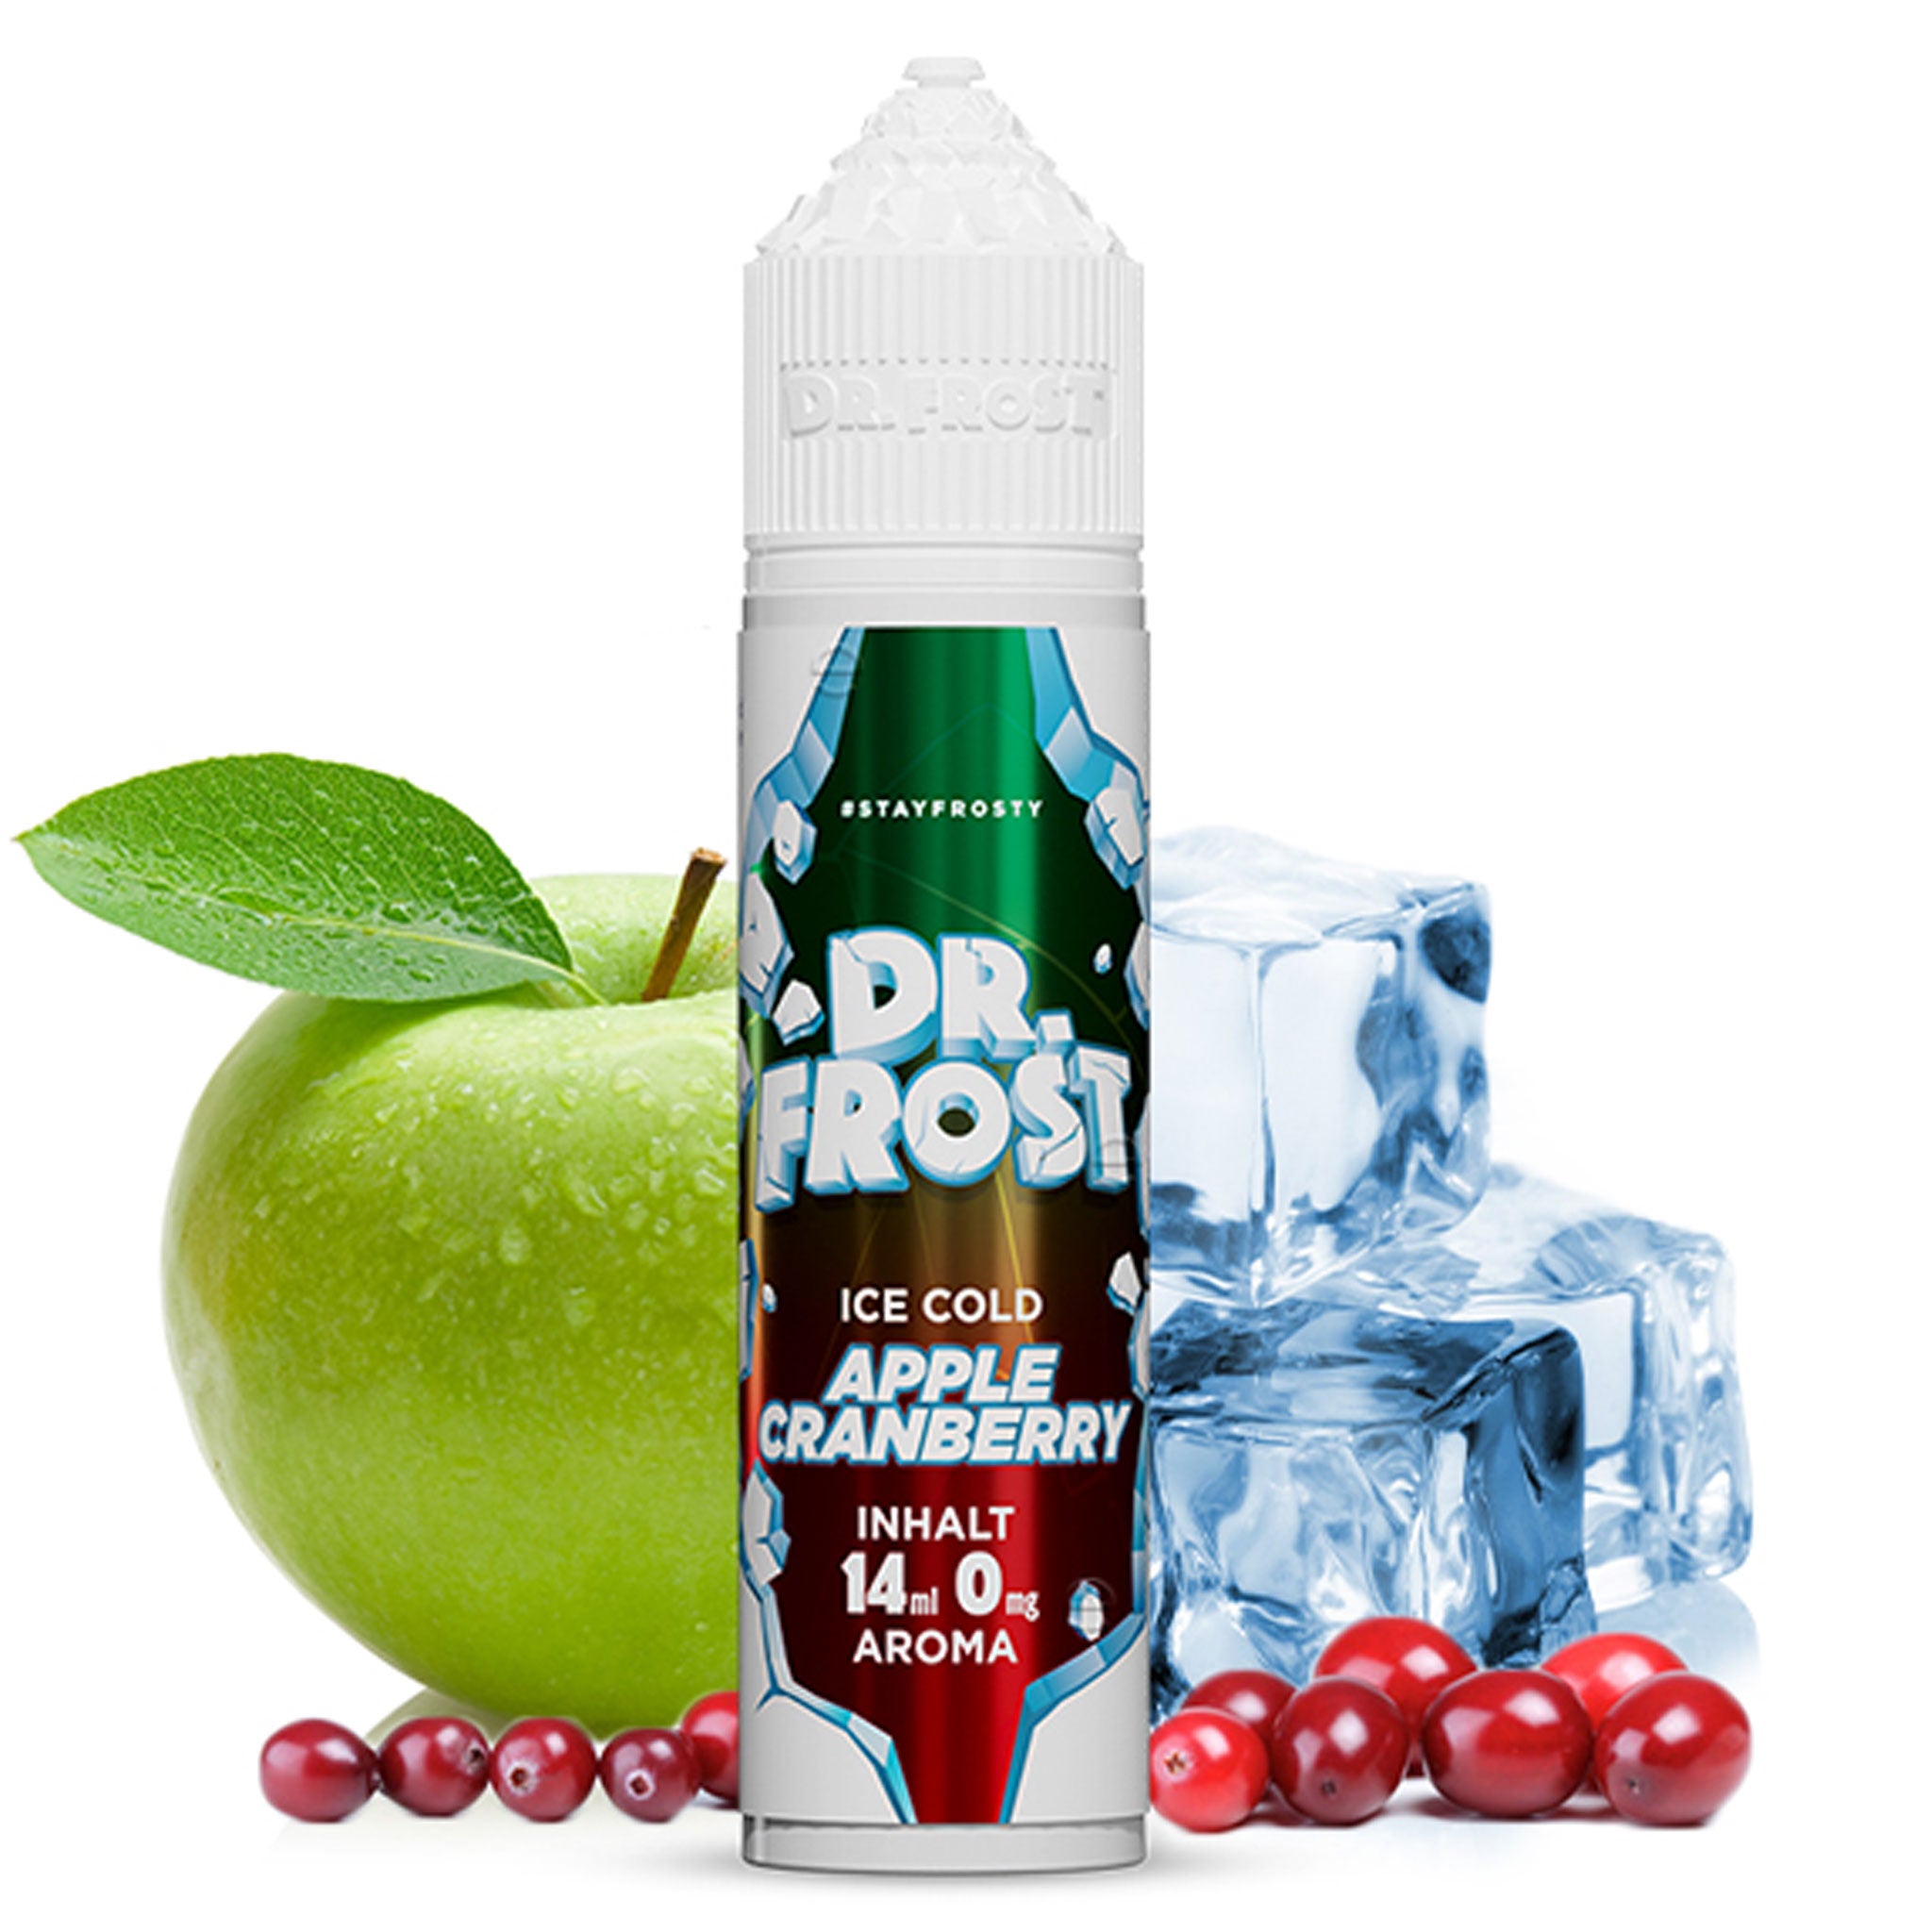 Dr. Frost - Ice Cold - Apple Cranberry - Longfill Aroma 14 ml